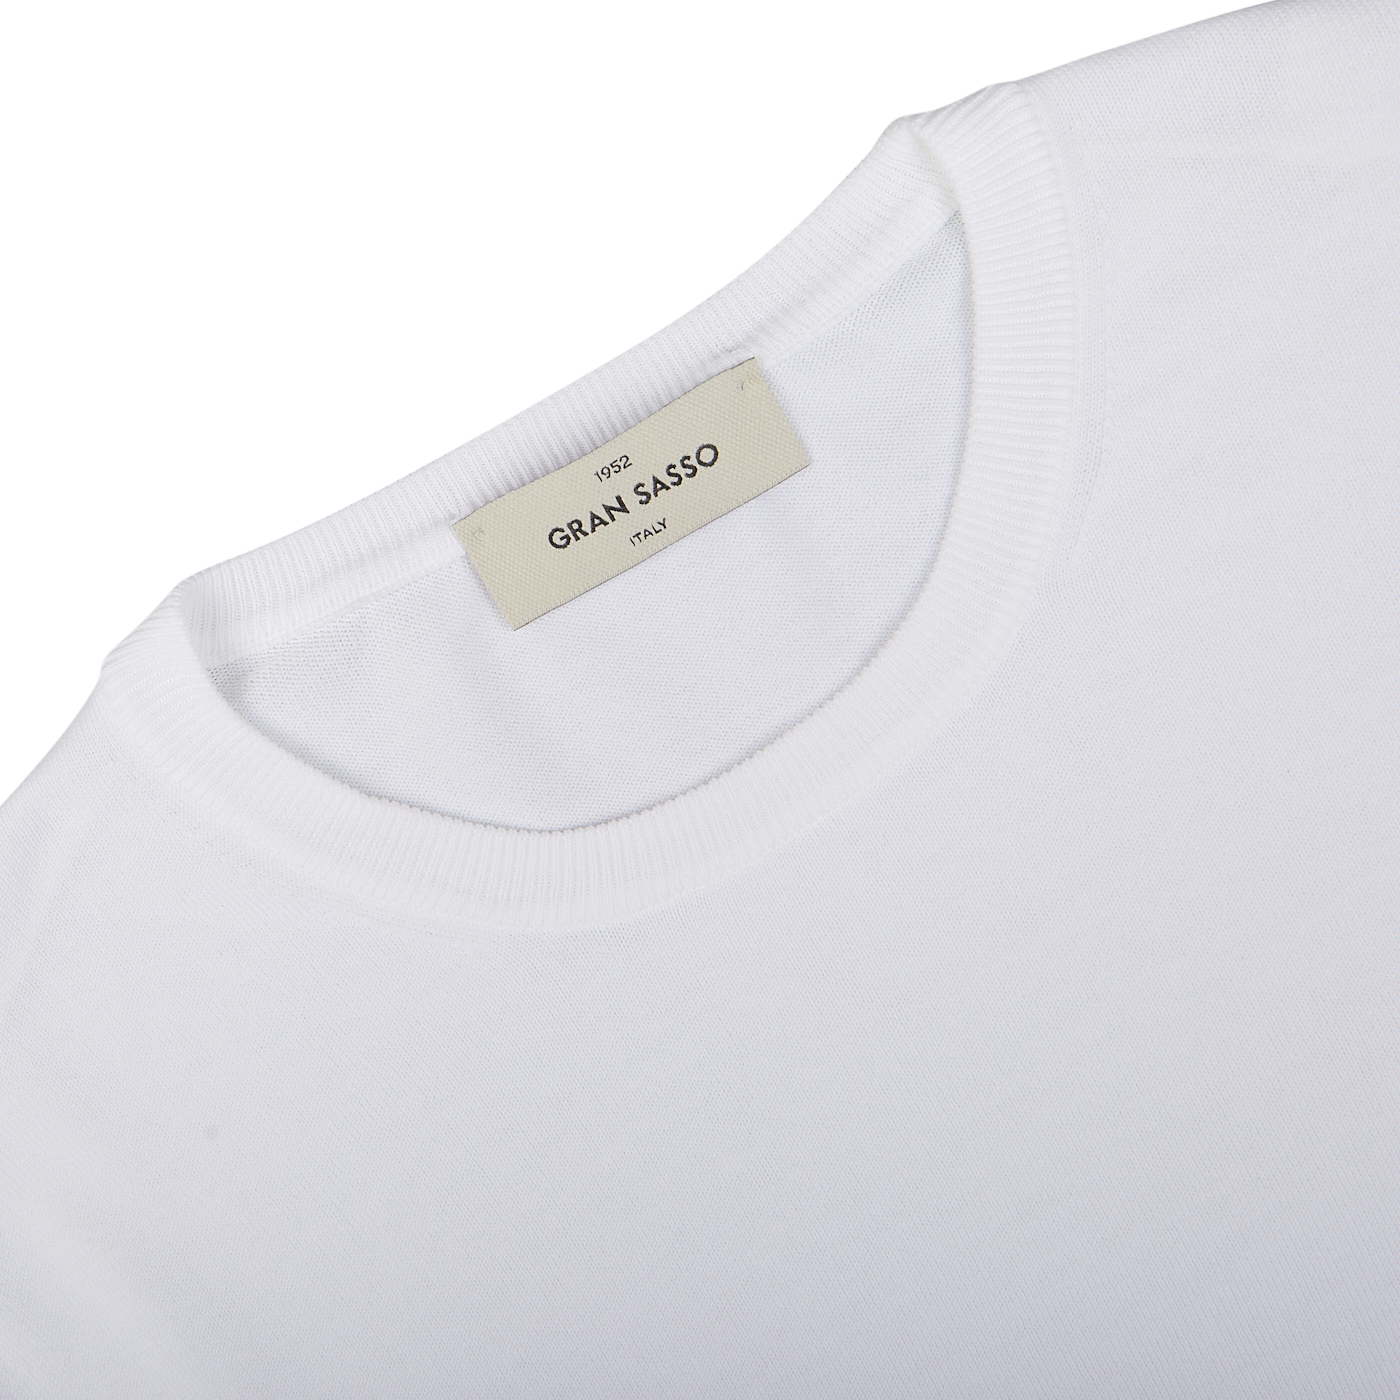 Close-up view of a white knitted Gran Sasso Organic Cotton T-shirt's collar with a "Gran Sasso" size label.